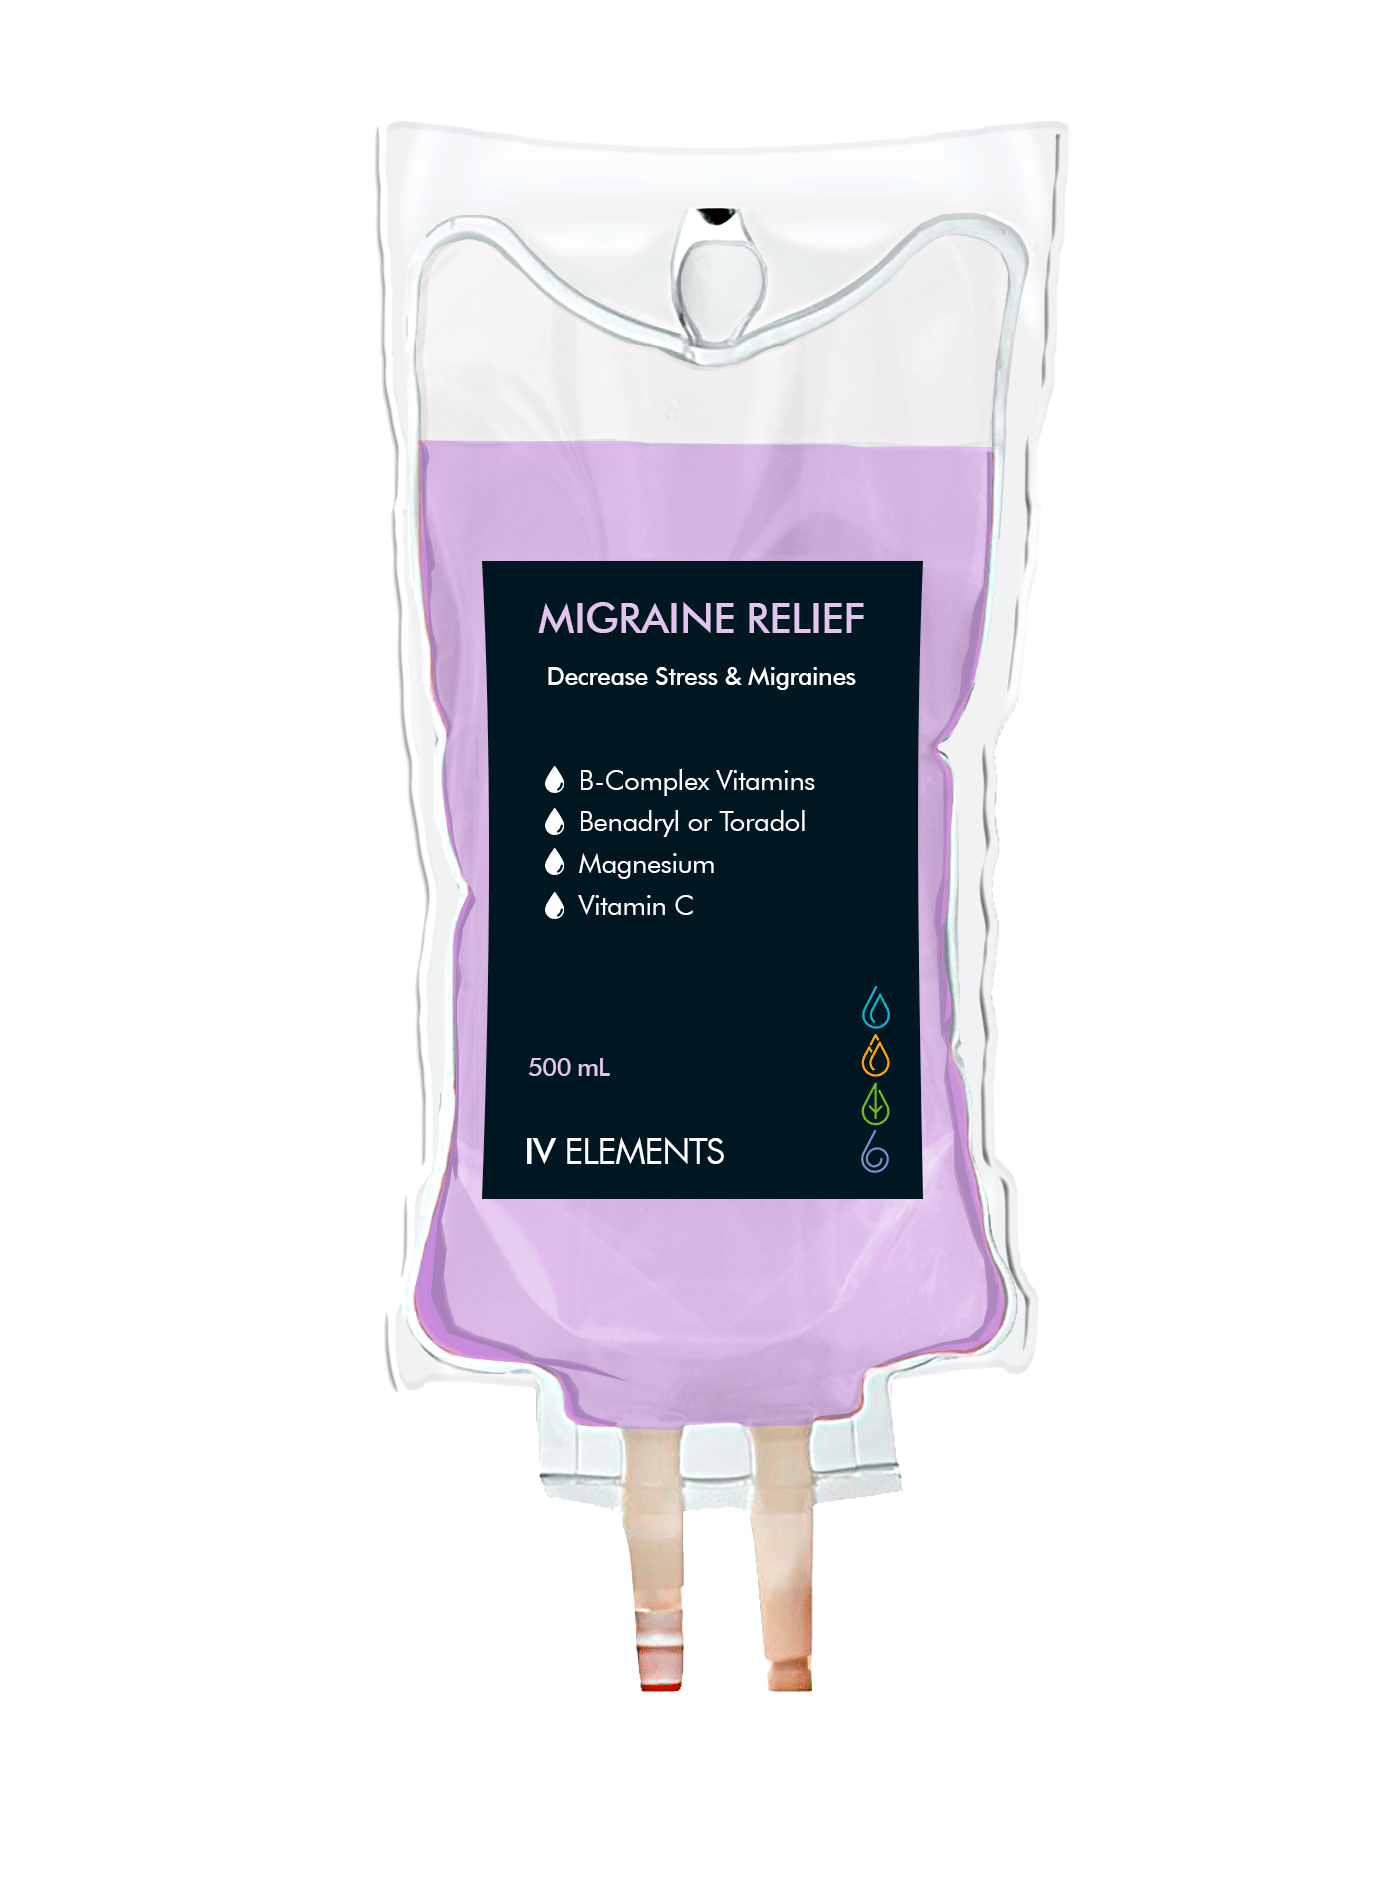 Migraine Relief IV drip bag from IV Elements: Decrease stress & migraines